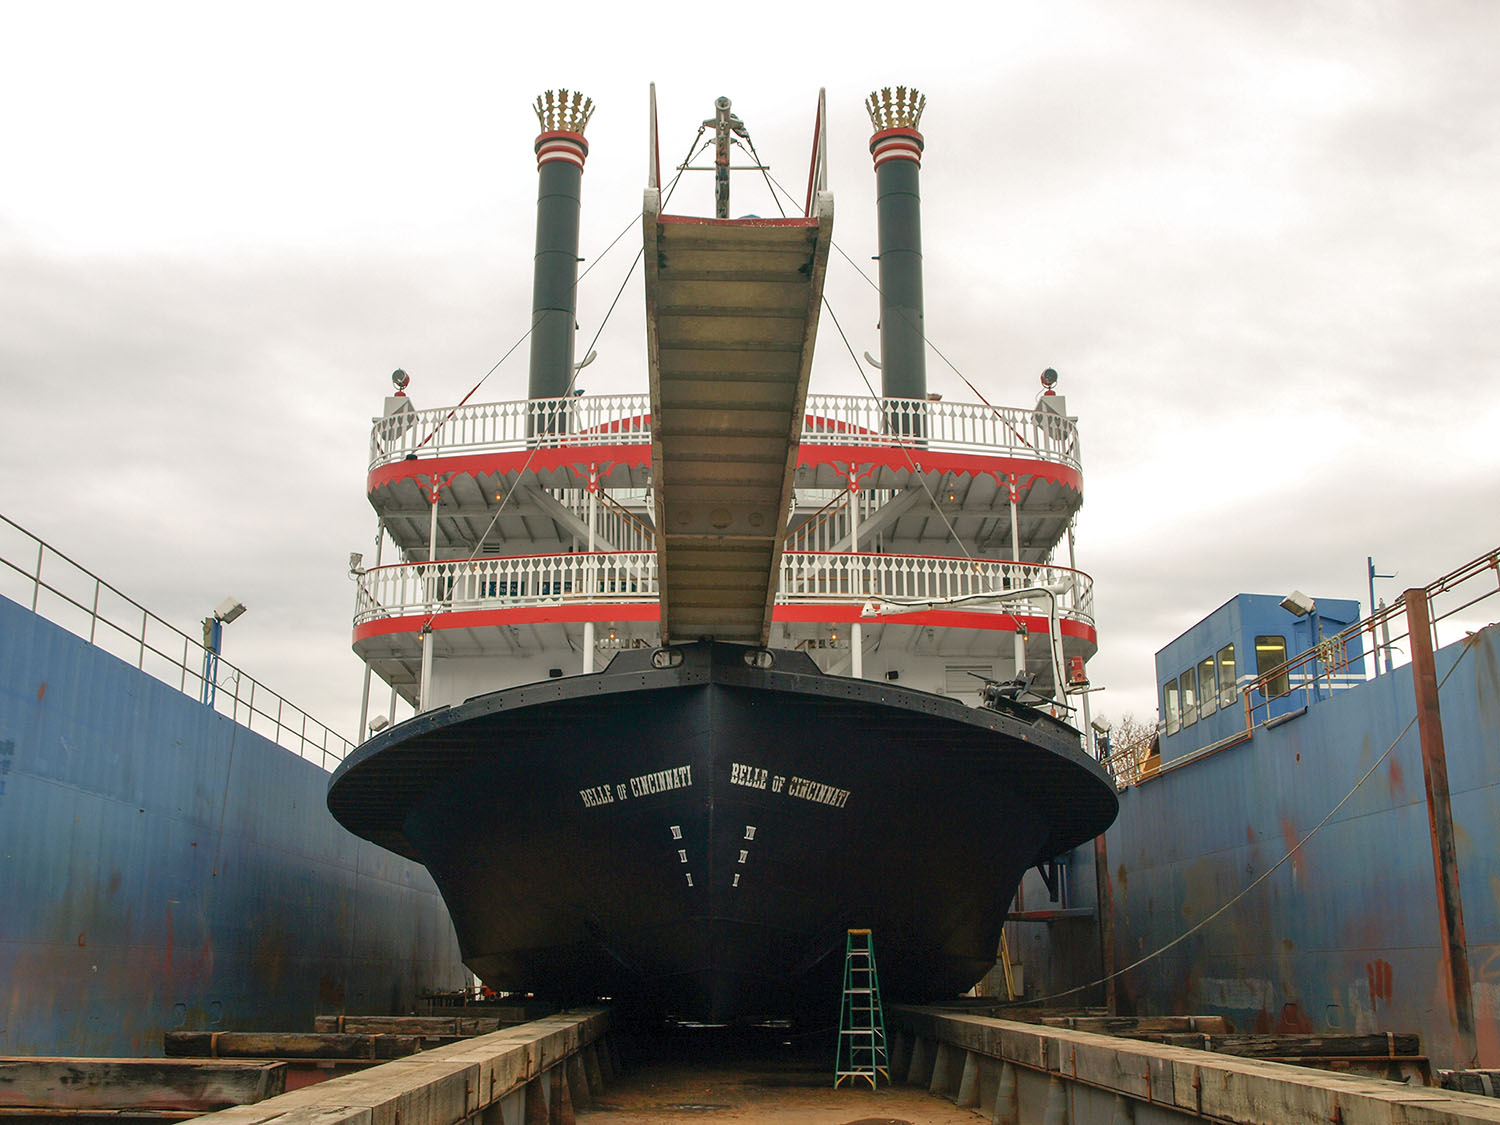 The Belle of Cincinnati was recently on O-Kan Marine Repair’s 240- by 80-foot drydock for its five-year inspection. (Photo by Jim Ross)